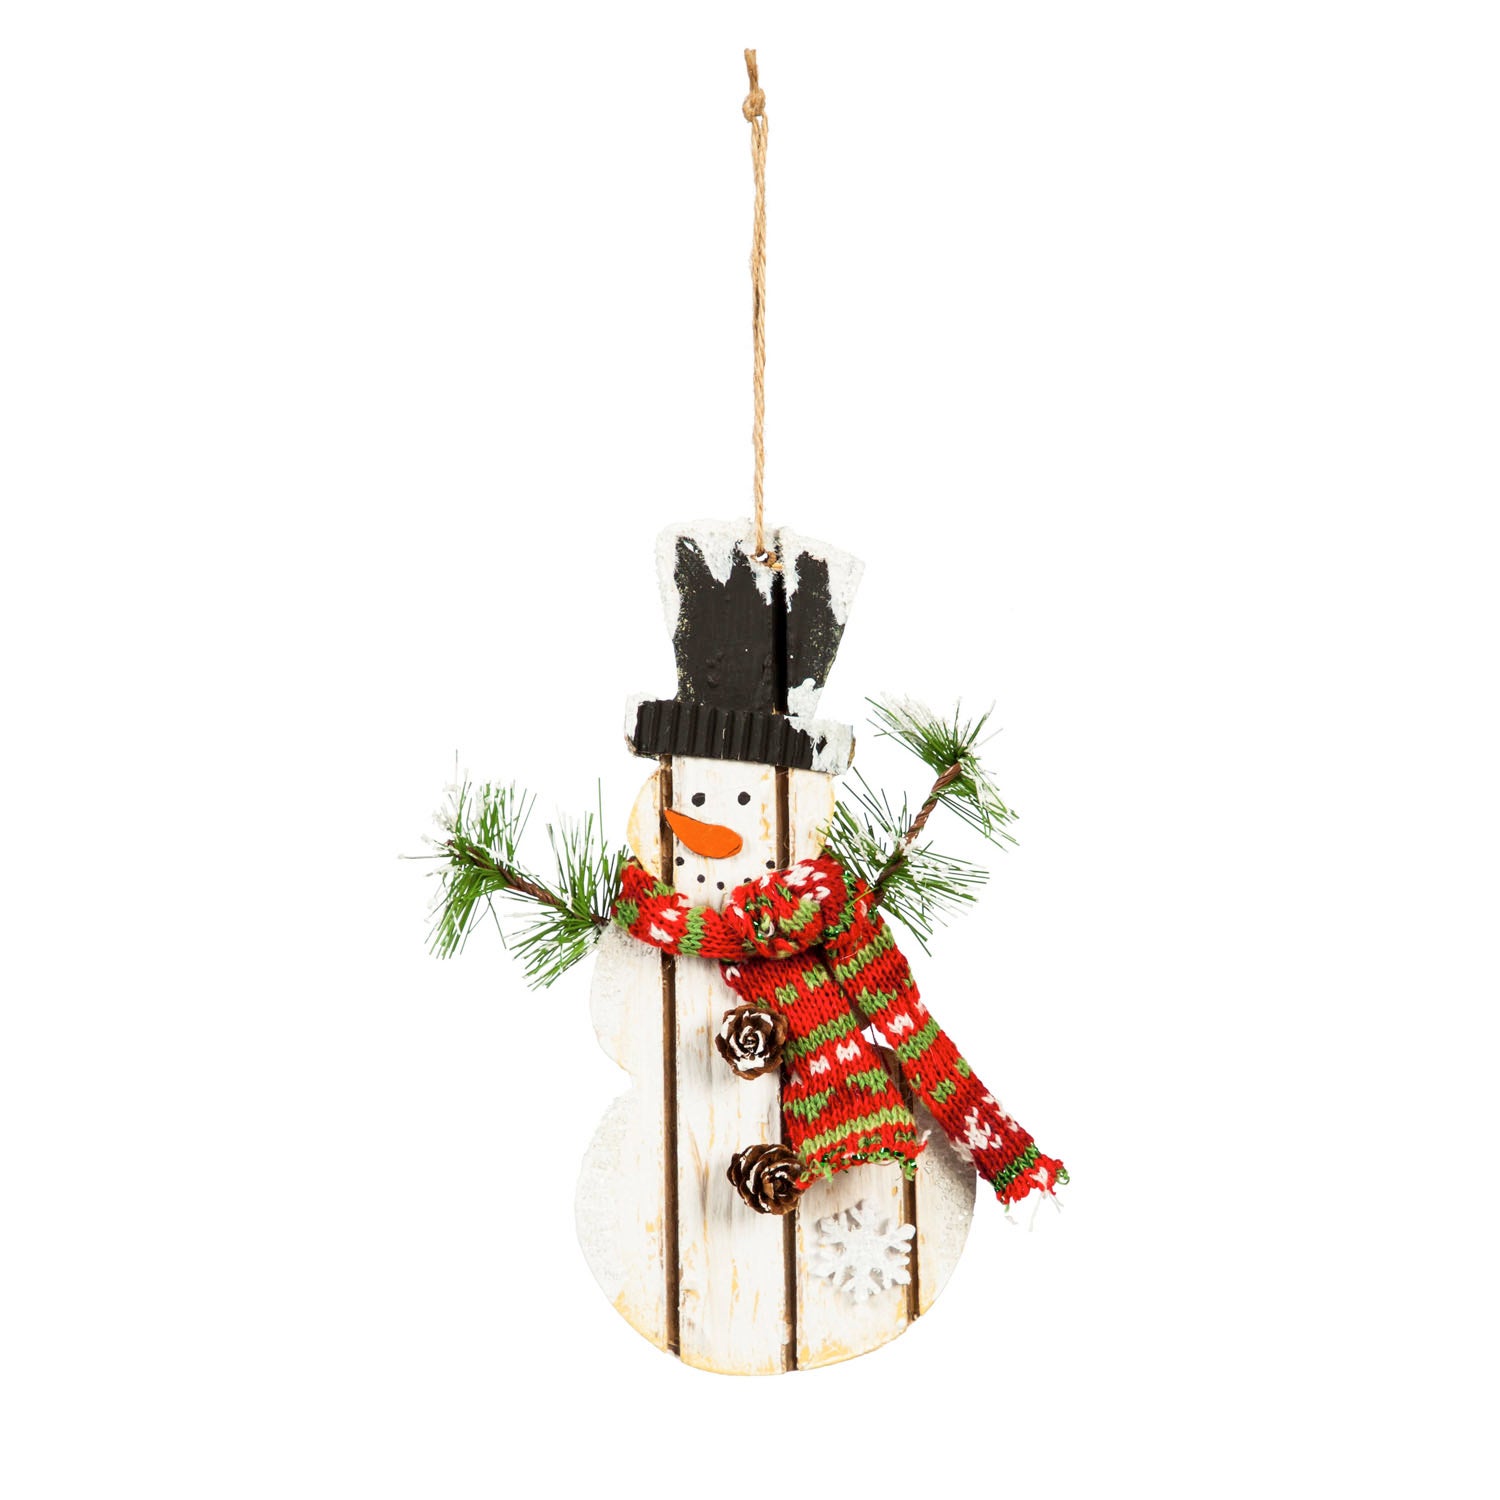 Wooden Snowman Ornament with Scarf and Foliage Accents